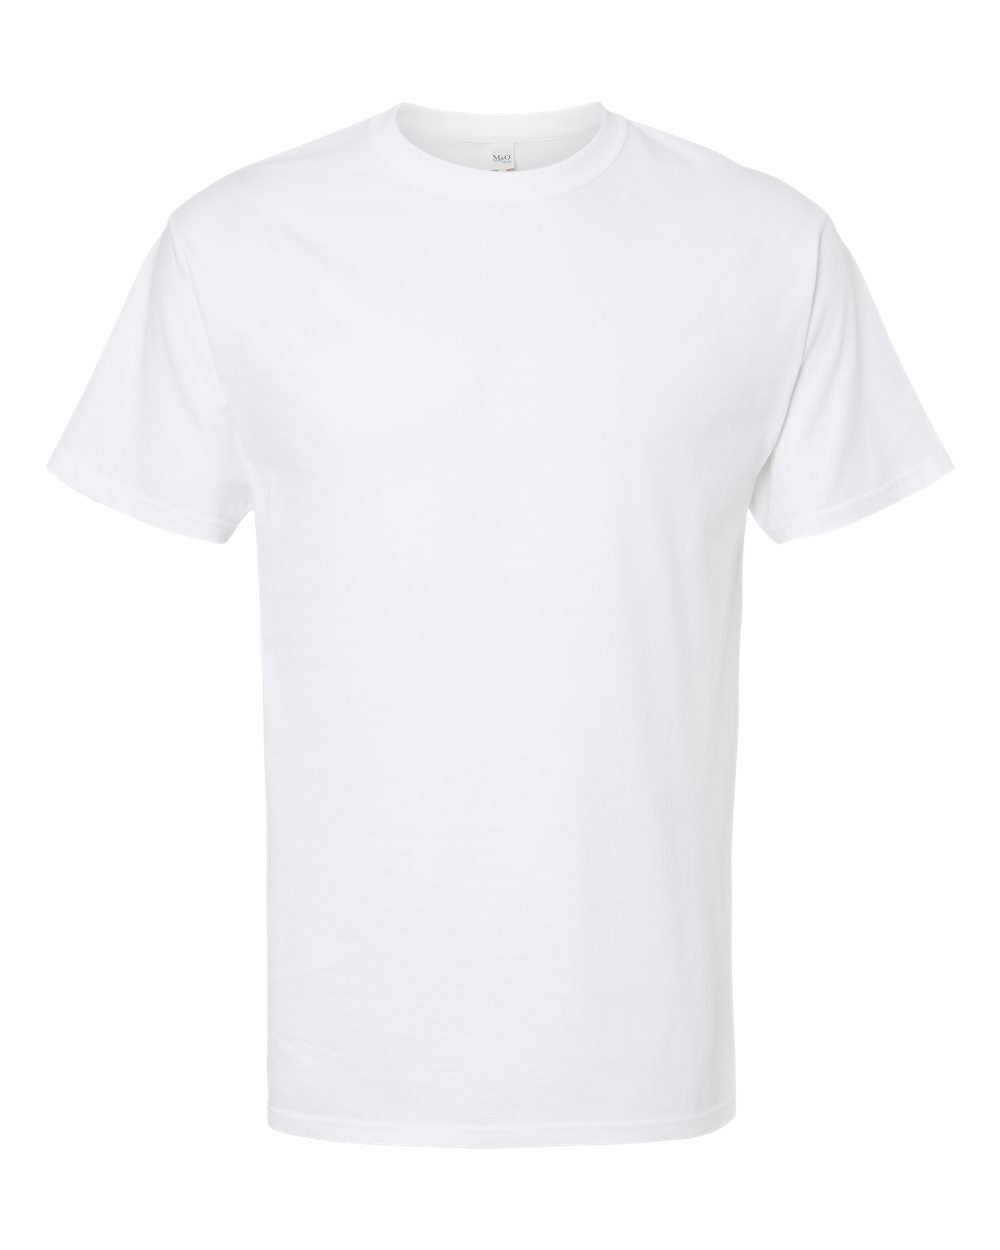 Pretreated M&O 4800 Gold Soft Touch T-Shirt - White